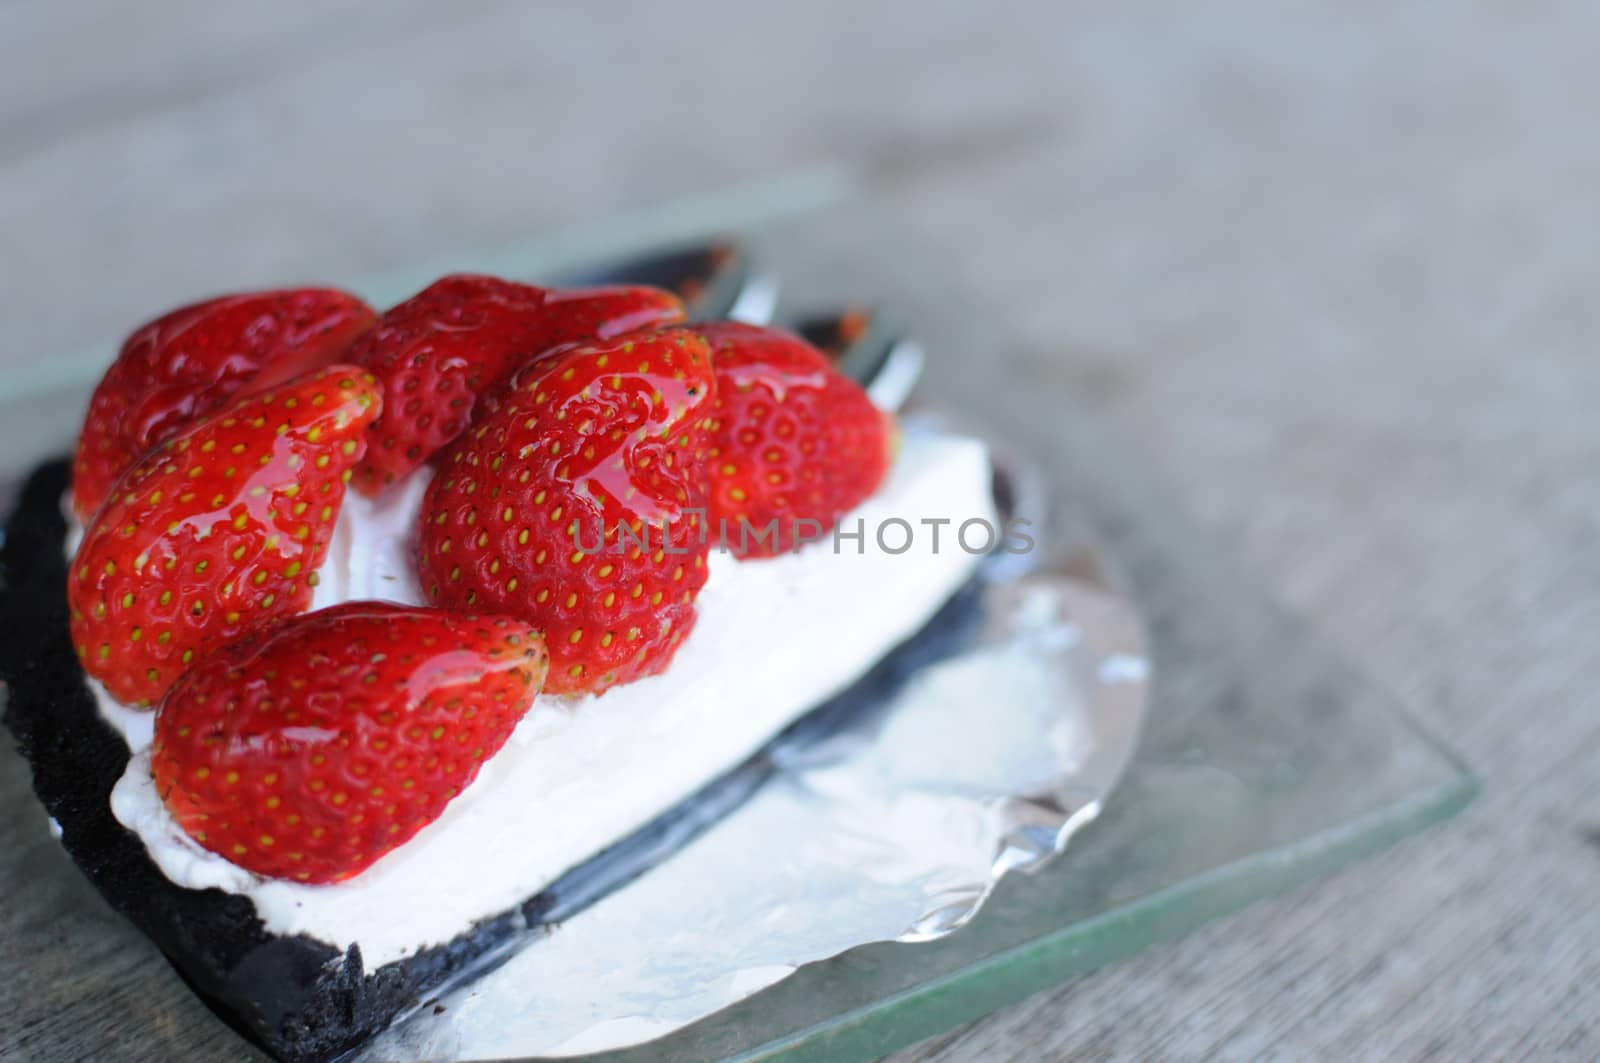 Strawberry cake on Glass Plate  by letoakin